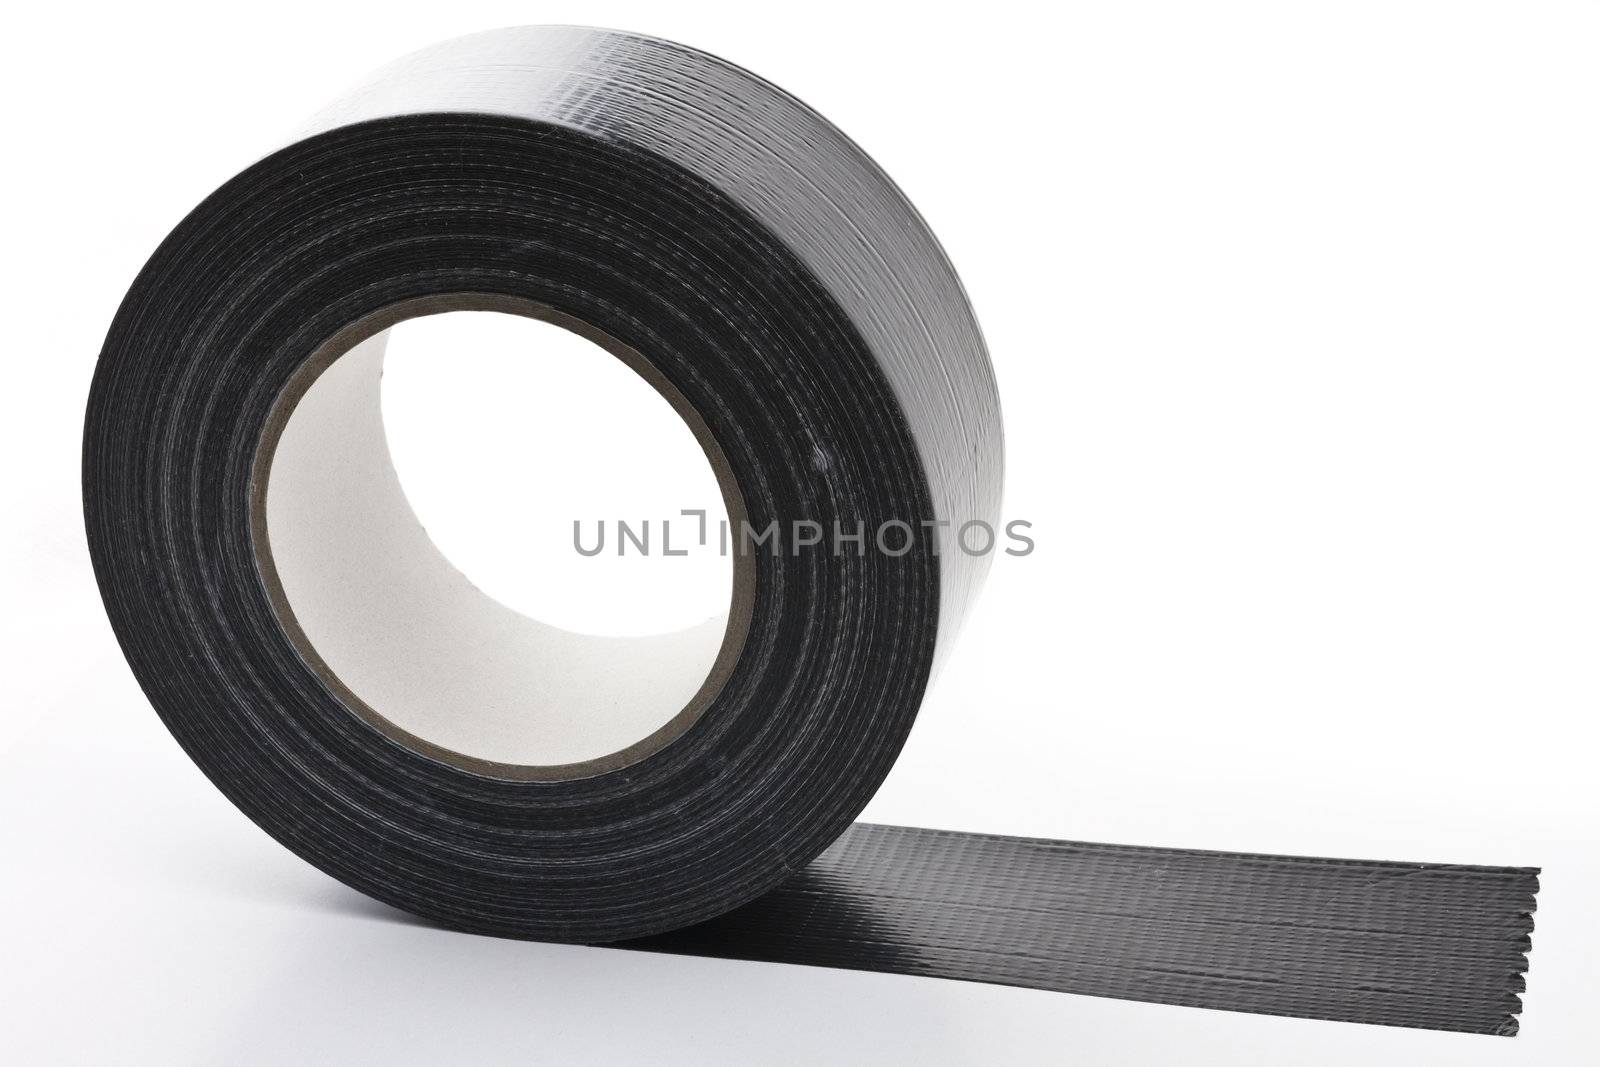 black adhesive tape  on light background. partly unroled